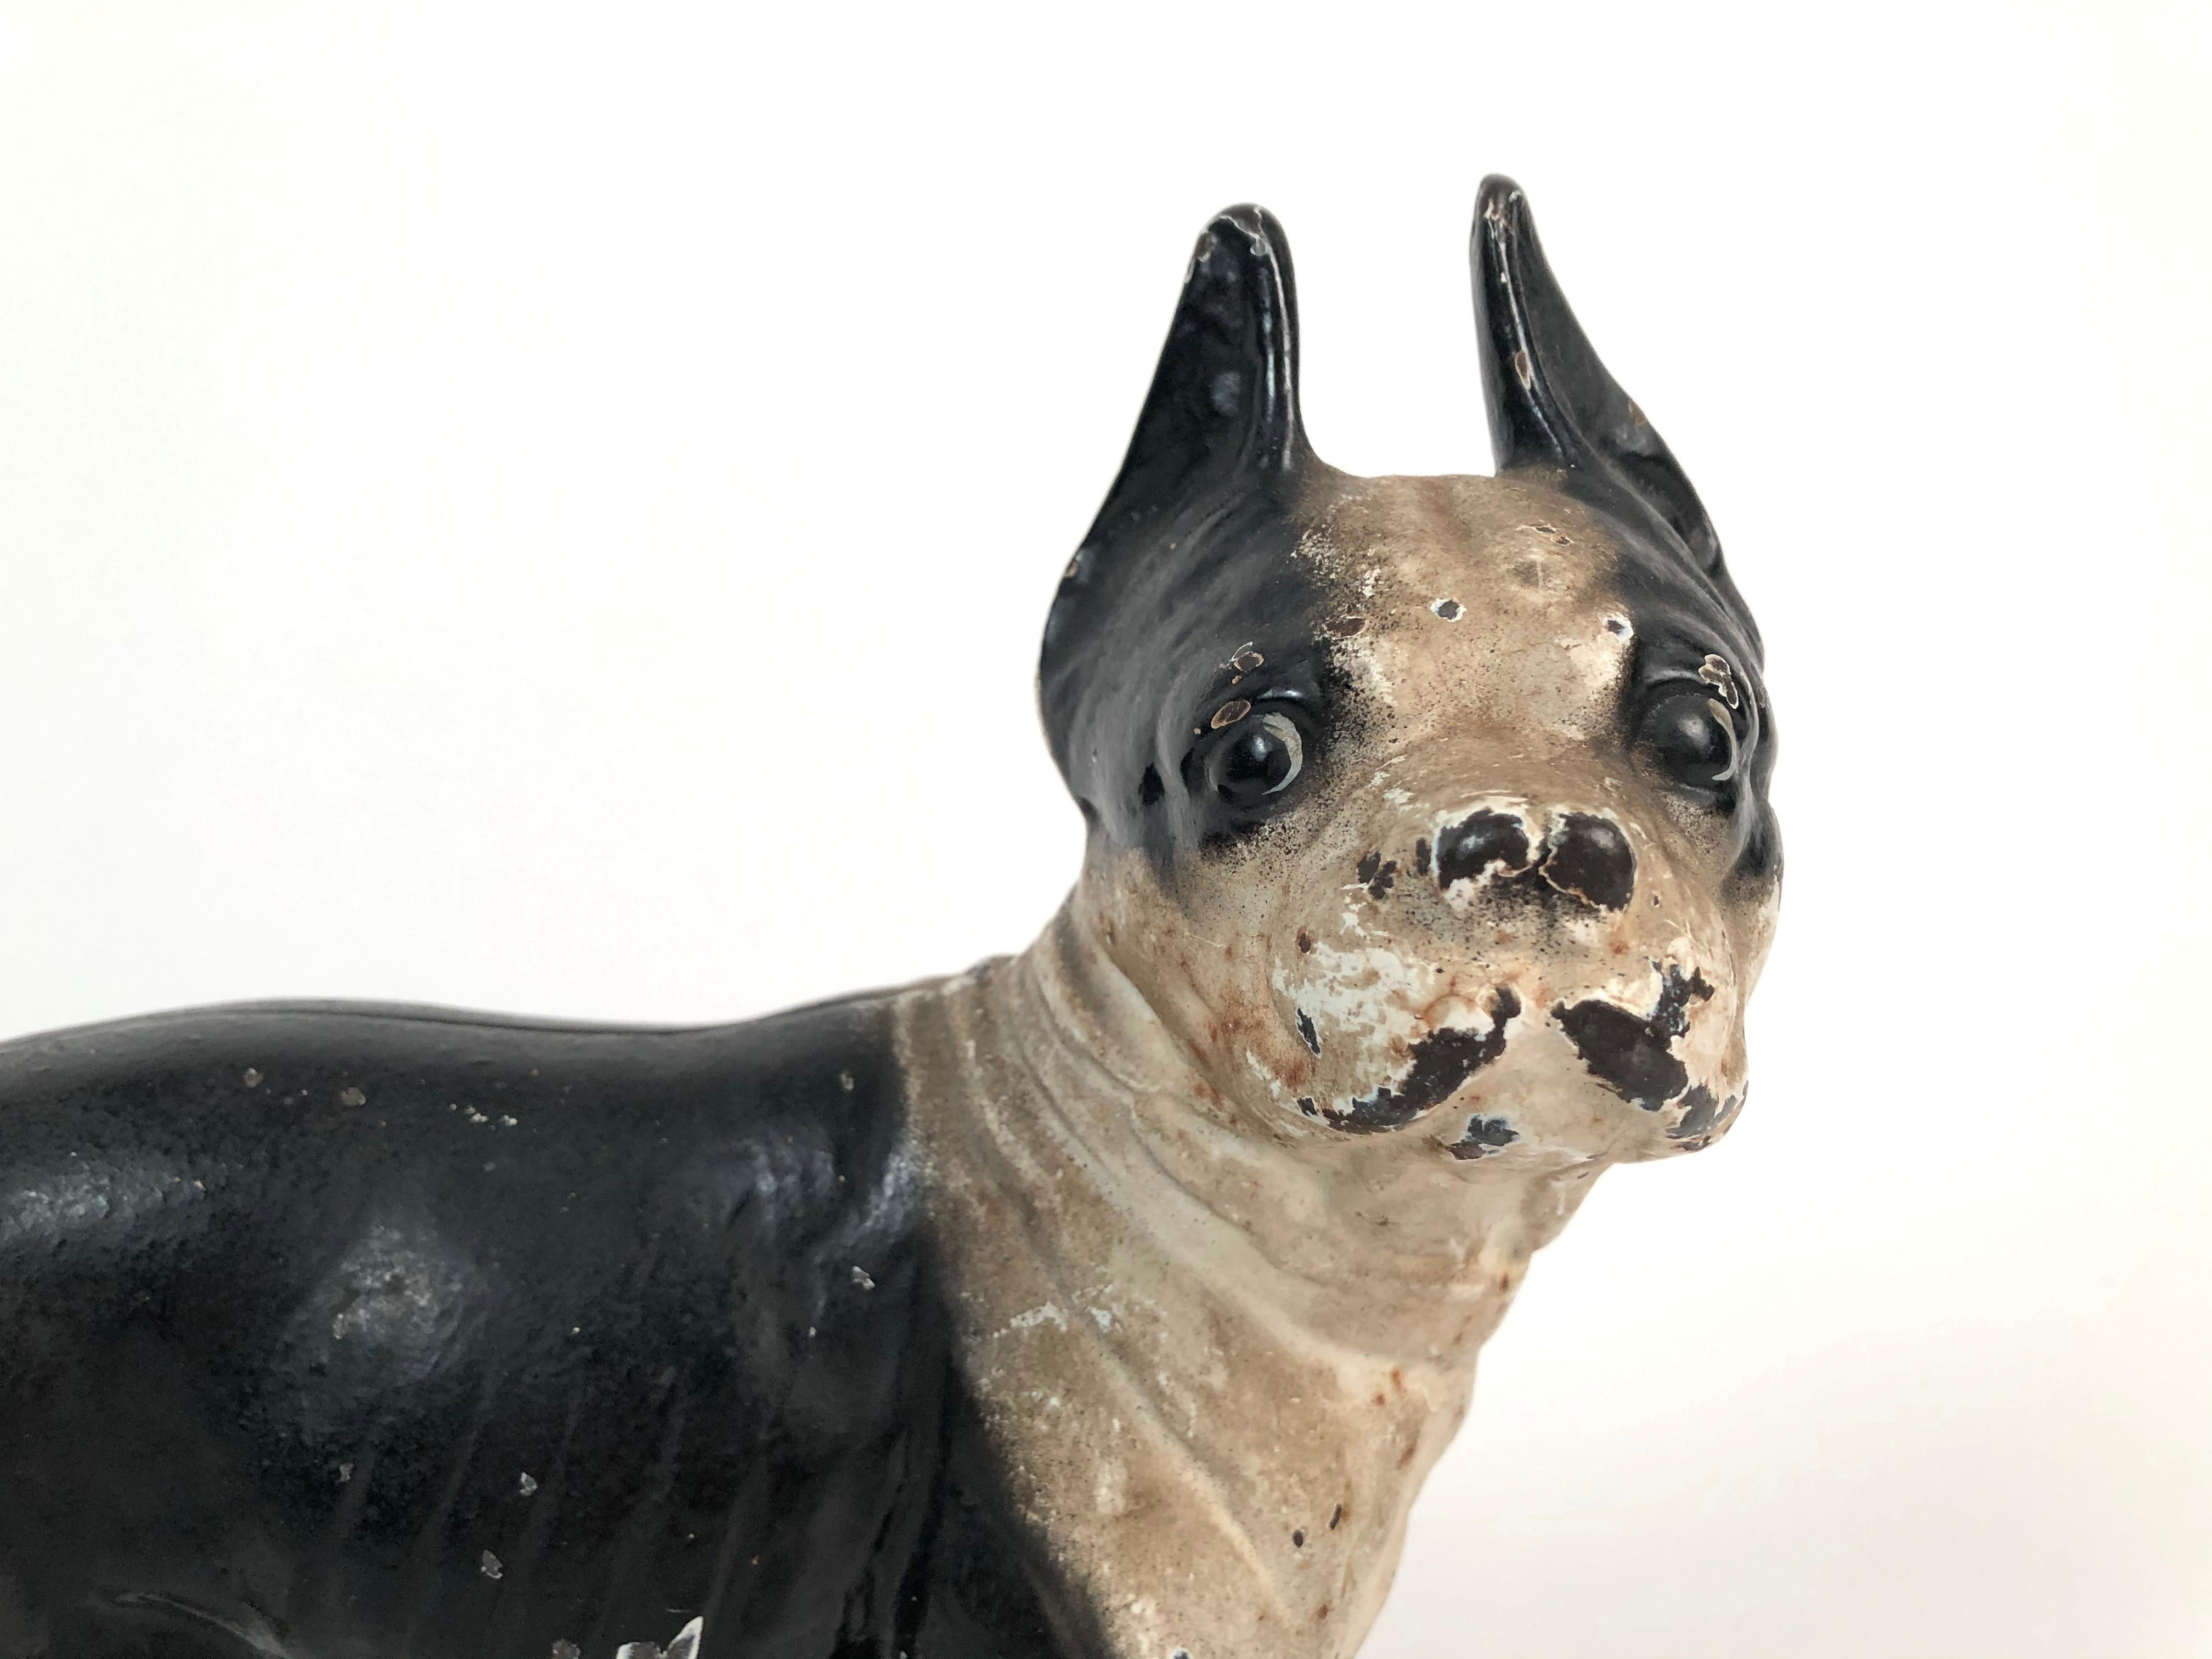 A vintage cast iron Boston Terrier door stop, retaining its original black and white painted surface, probably made by Hubley, Connecticut, circa 1920s. With an alert stance, its head turned to the side, and wide open eyes and ears perked up, this